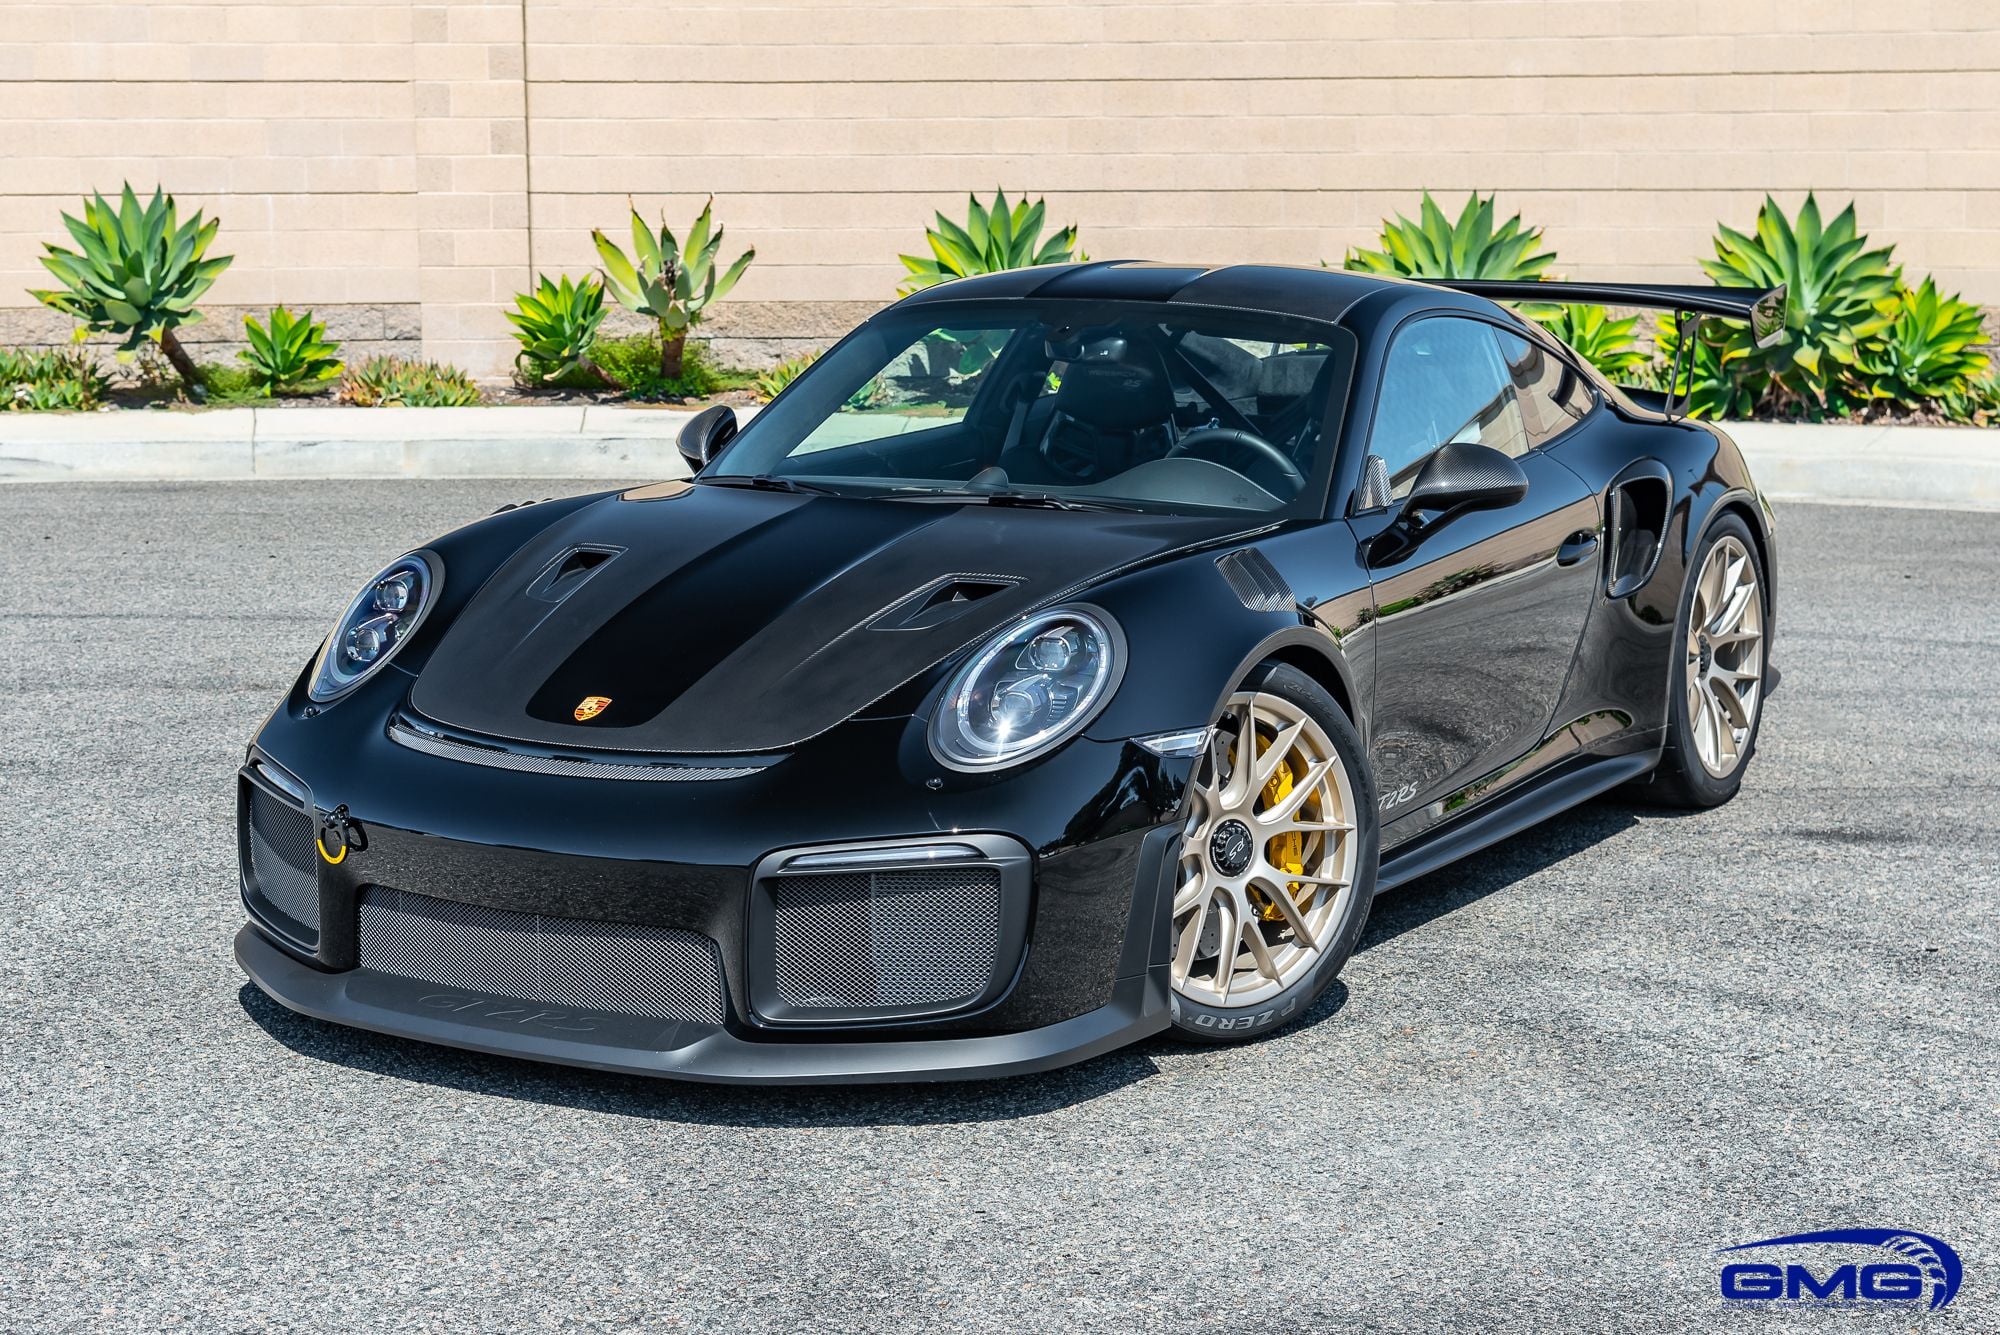 2018 Porsche GT2 - Black Porsche 991 GT2 RS FOR SALE - Low miles, GMG upgrades, track ready, stunning! - Used - VIN WP0AE2A93JS185195 - 2,300 Miles - 6 cyl - 2WD - Automatic - Coupe - Black - Southern California, CA 92704, United States